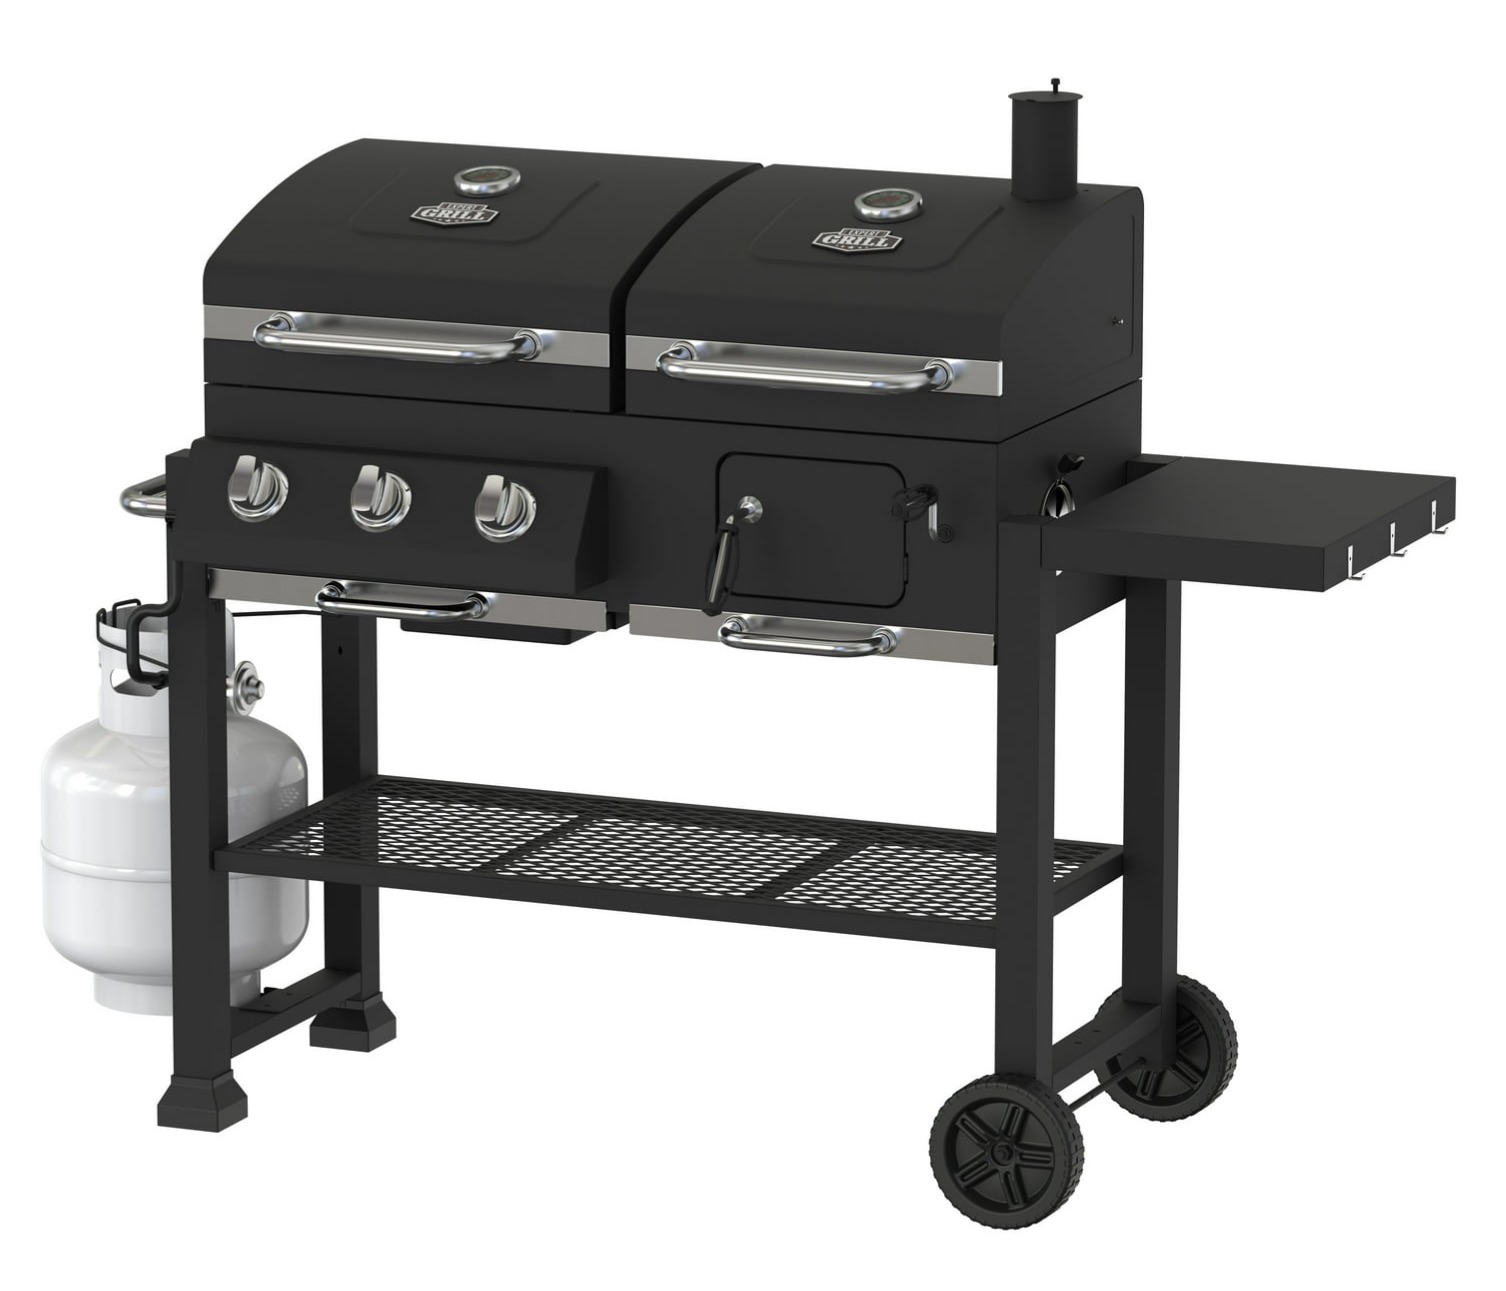 Expert Grill 3 Burner 2-in-1 Dual Fuel Gas and Charcoal Combo Grill $197 + Free Shipping